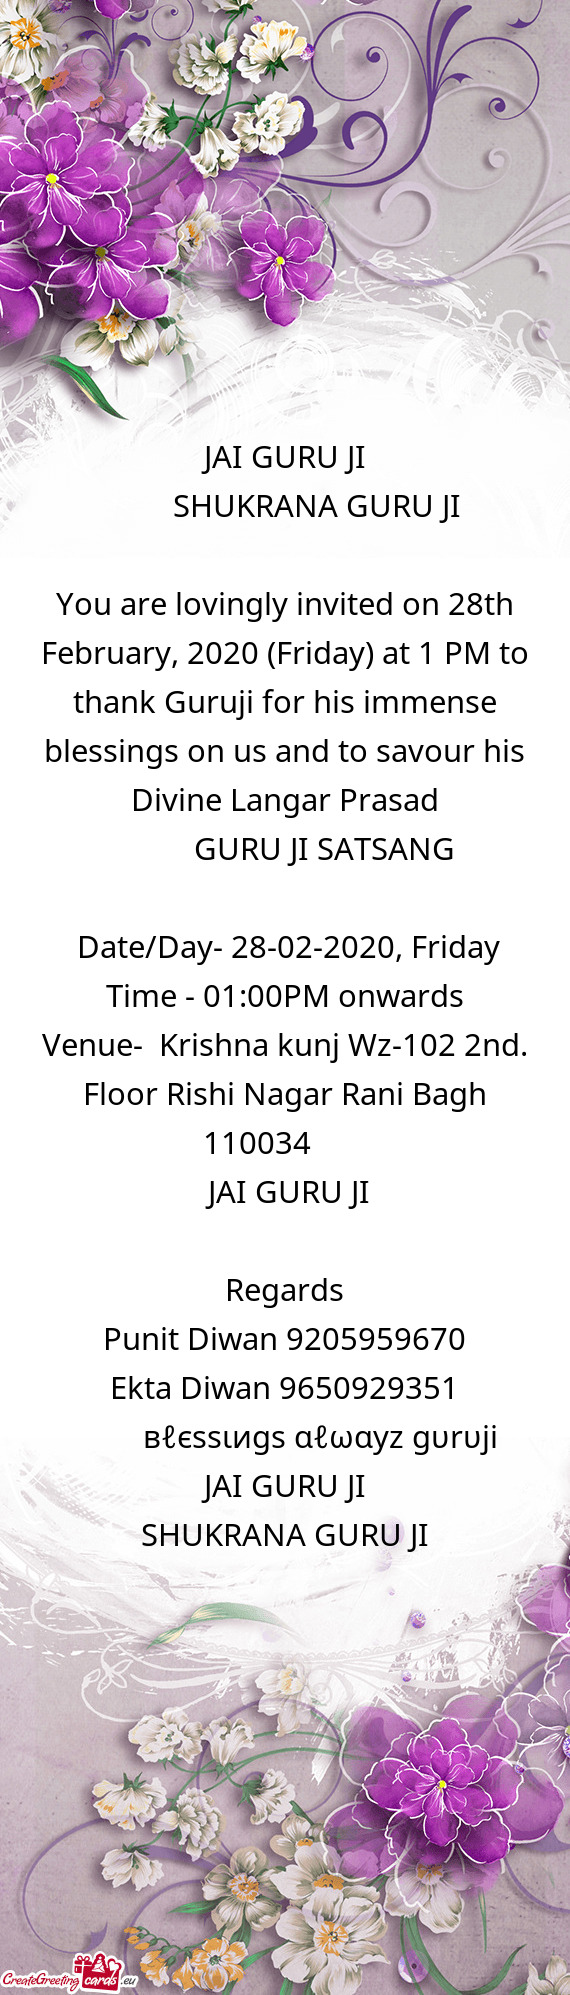 Ssings on us and to savour his Divine Langar Prasad